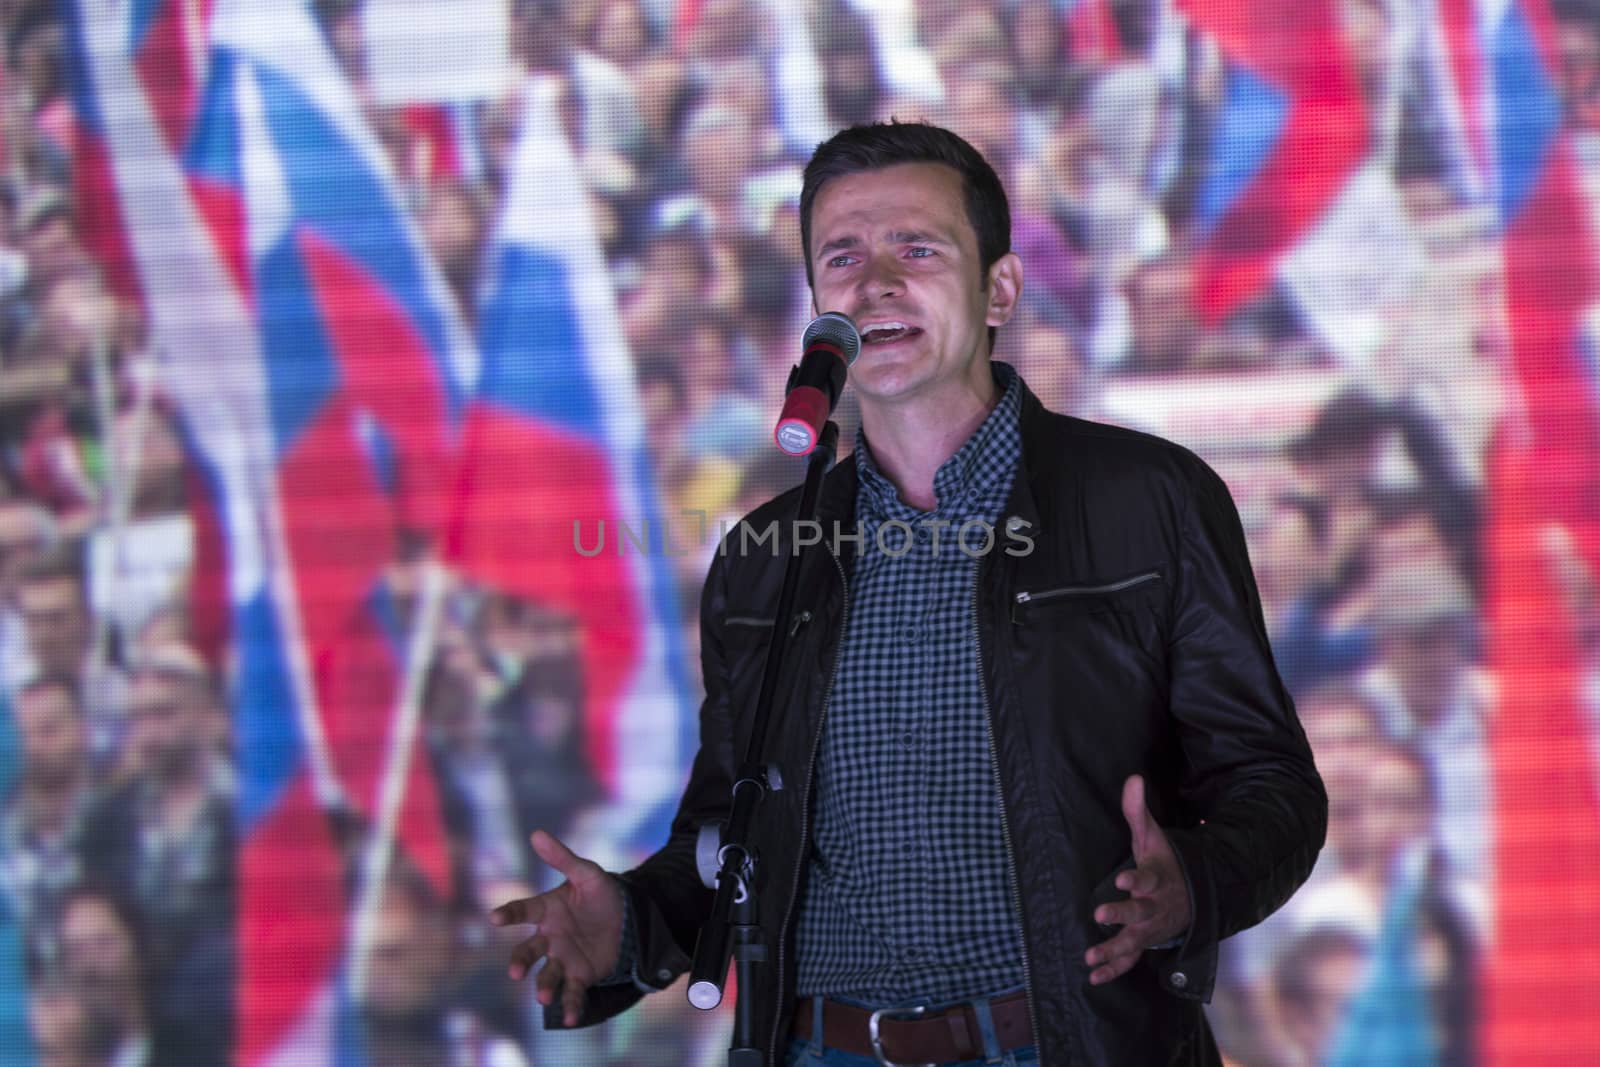 RUSSIA, Moscow: Activist and liberal politician Ilya Yashin addressed Russian opposition activists as they rallied in Moscow on September 20, 2015, in the wake of regional elections that widely favored the ruling United Russia party and prompted accusations of vote rigging. The Meeting to Change Power protest, organised by prominent anti-corruption campaigner Alexei Navalny, drew an estimated 2,000-4,000 people, well short of estimates in advance of the rally. 